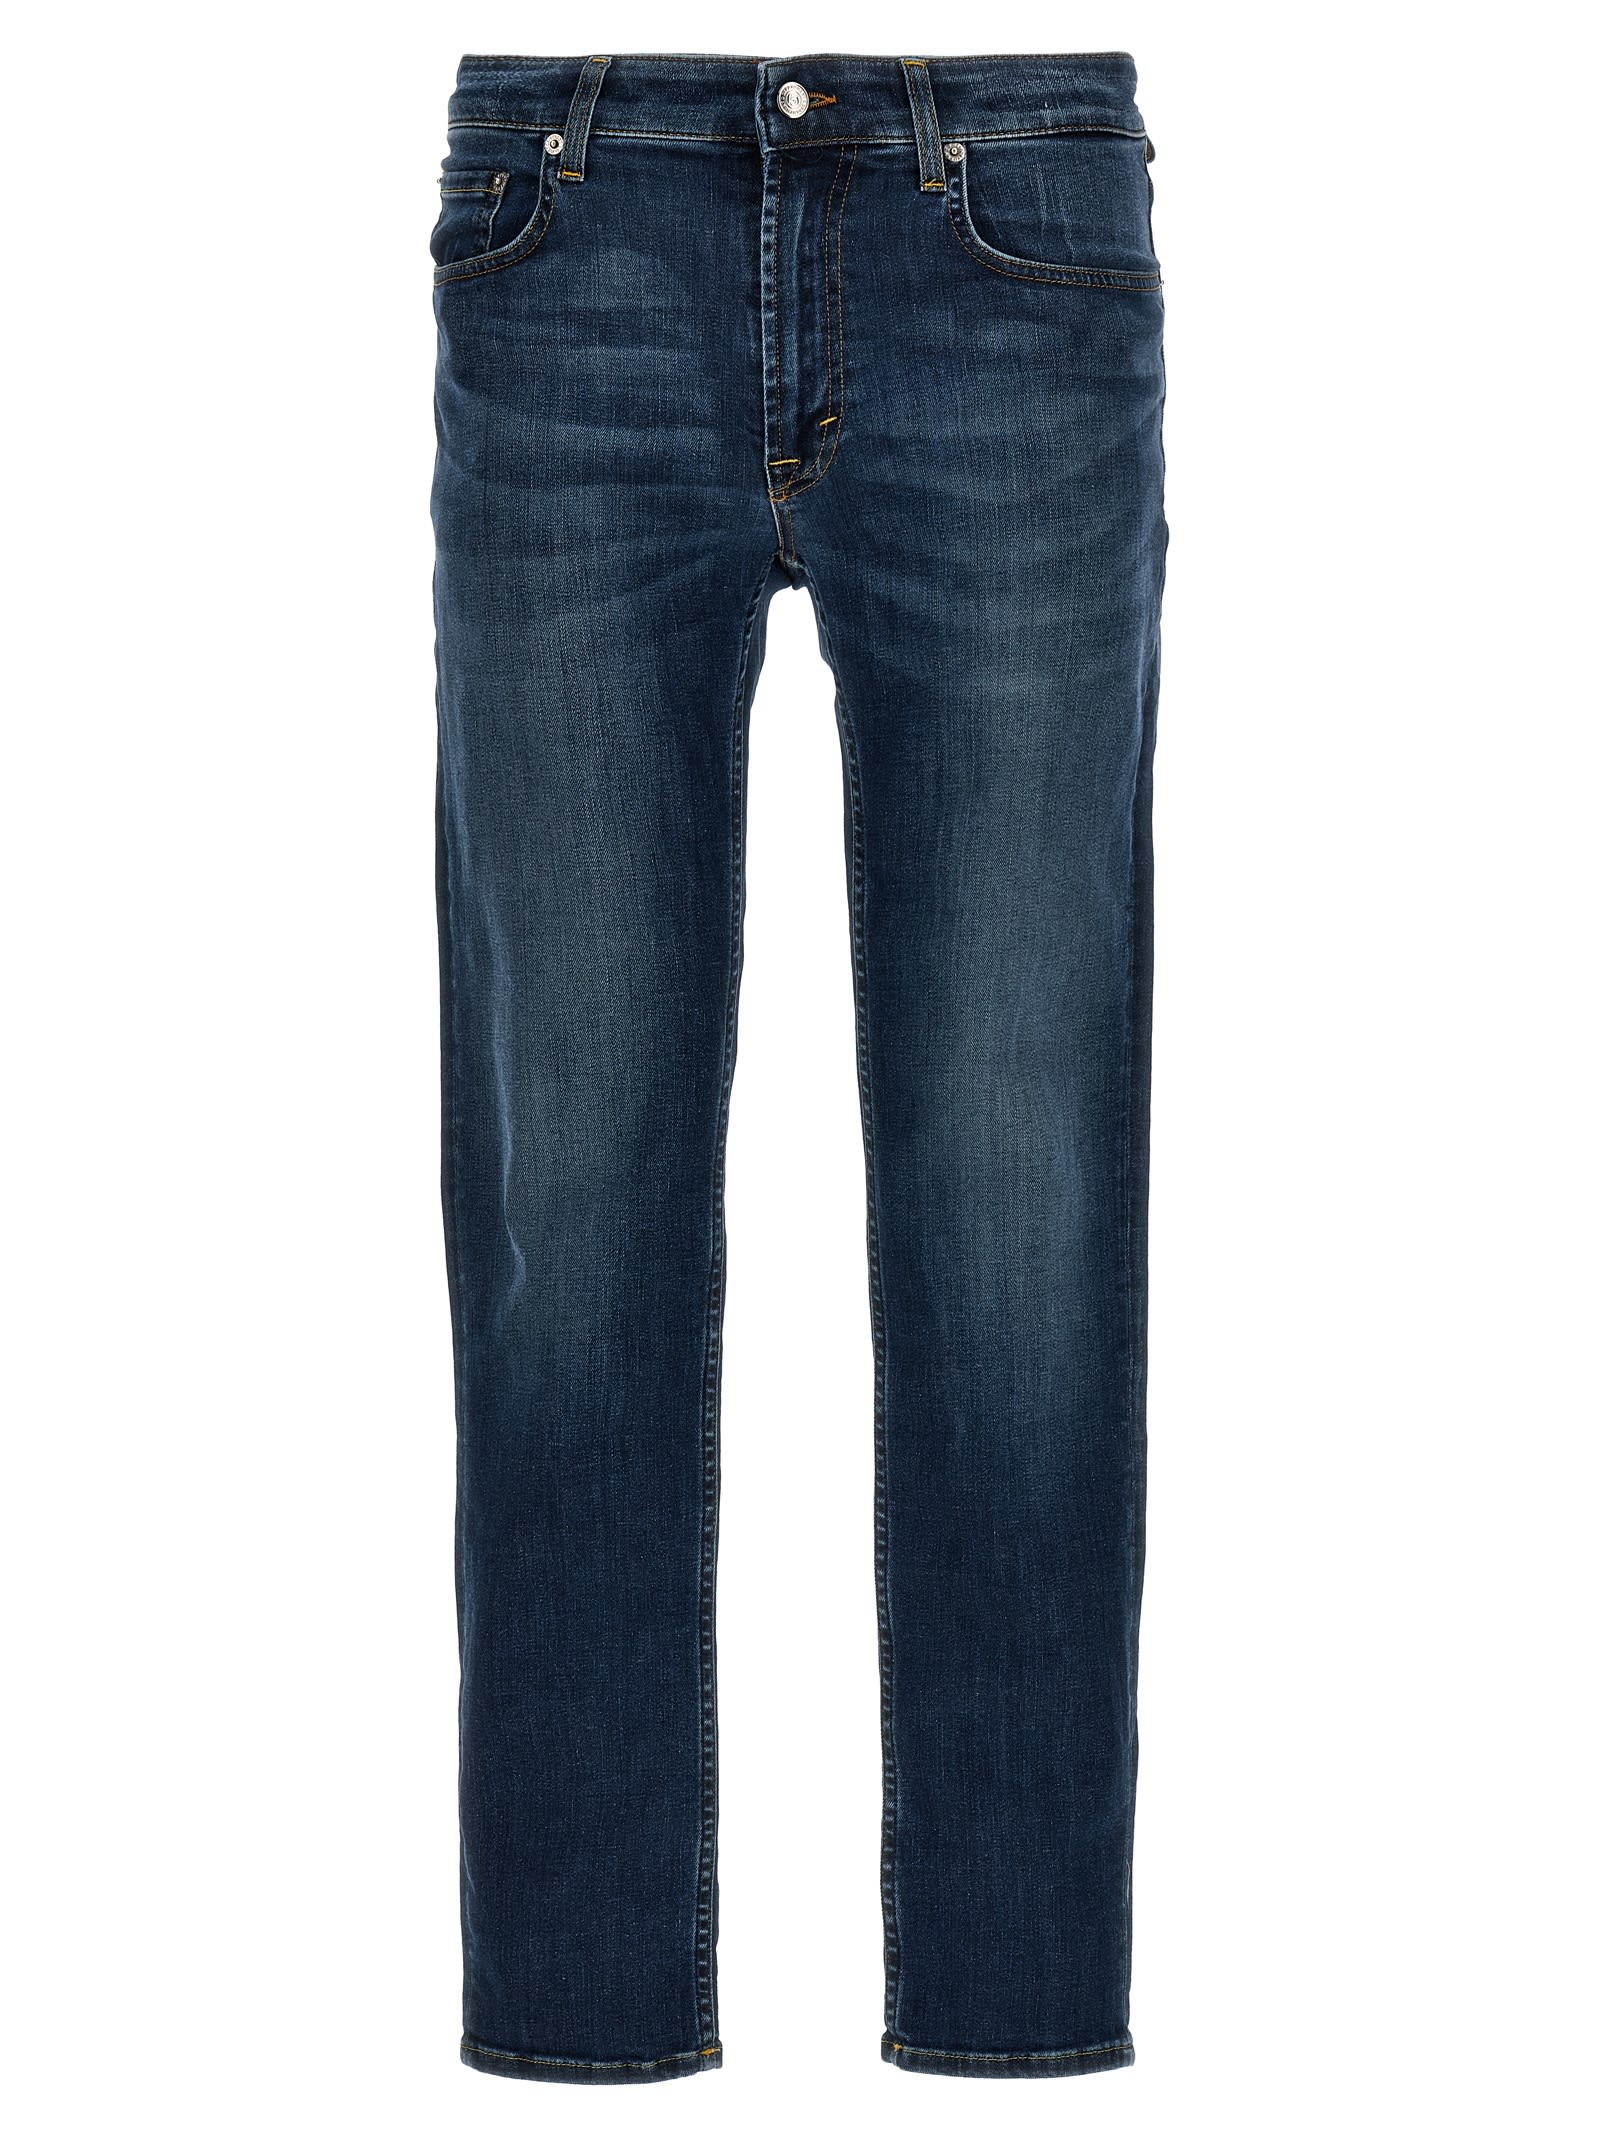 Department Five Skeith Jeans In Blue